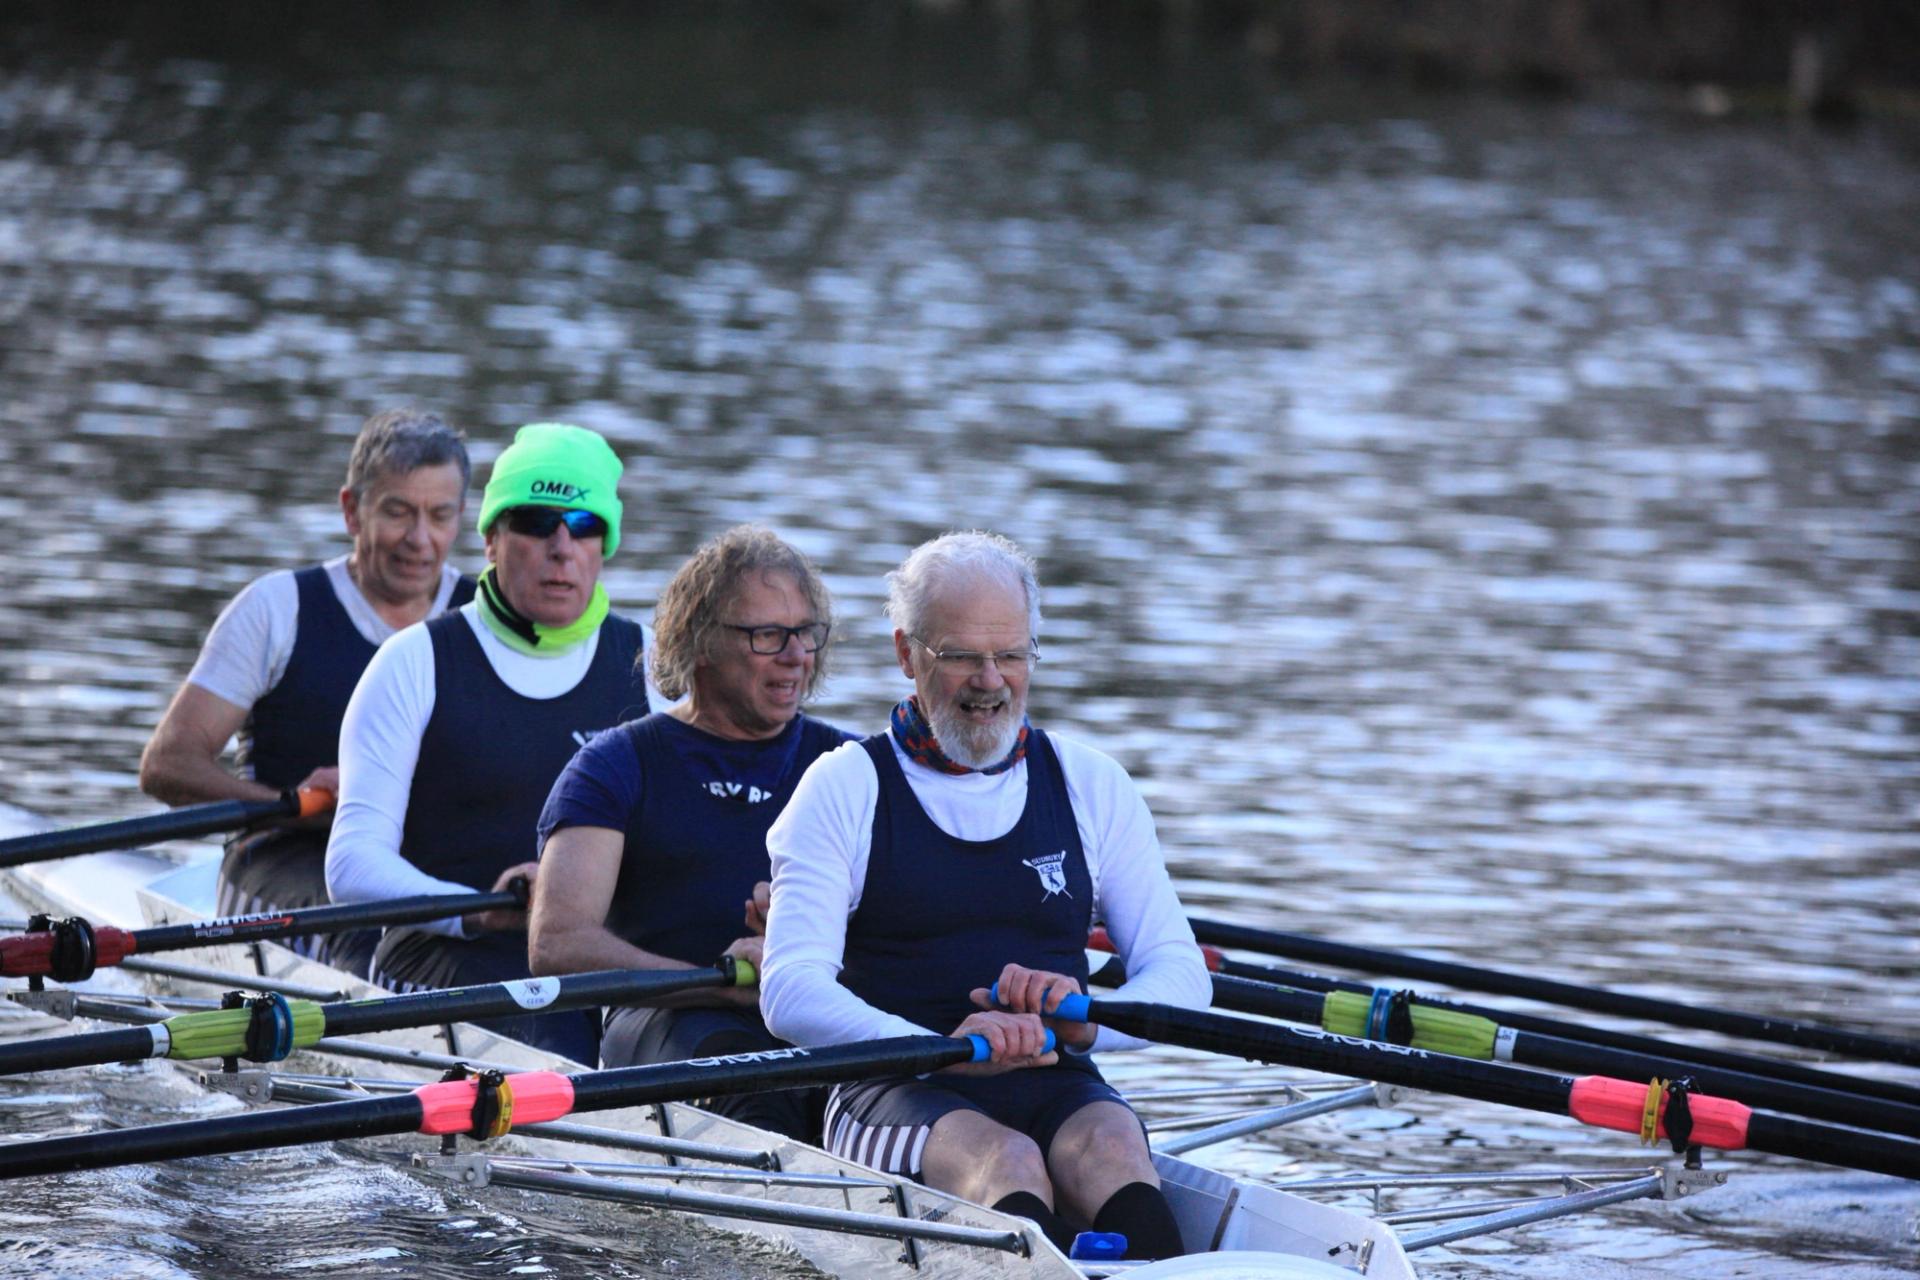 Our Masters H Crew of Andrew Blit, Jeremy Milbank, Keith Paxman and Mike Arnott, nearing the end of the 5km race.